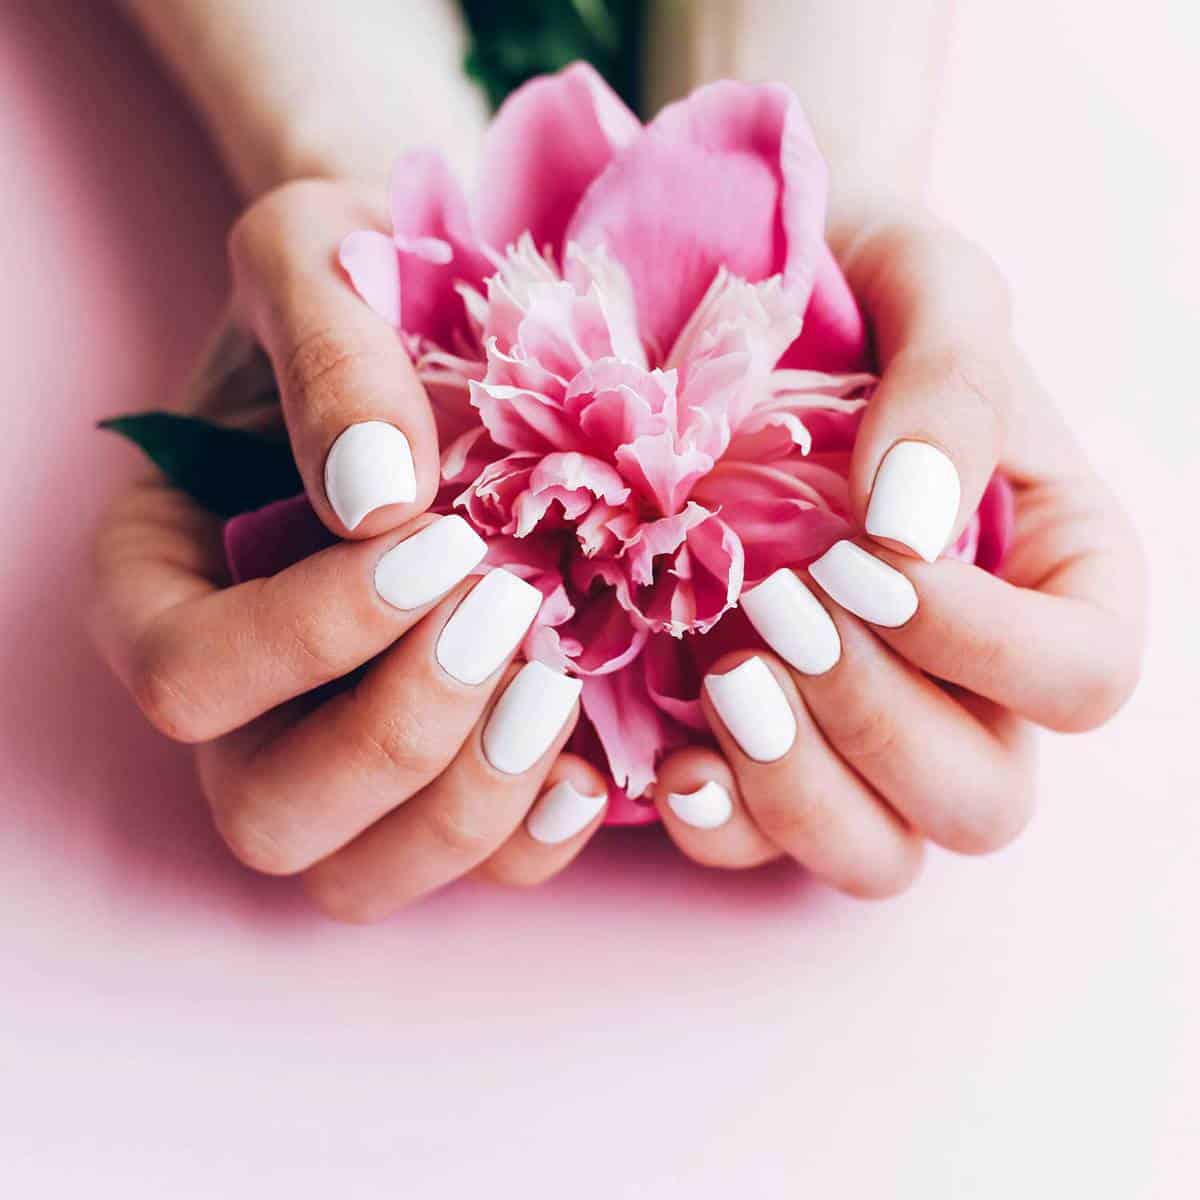 Female hands with white manicure holding a peony